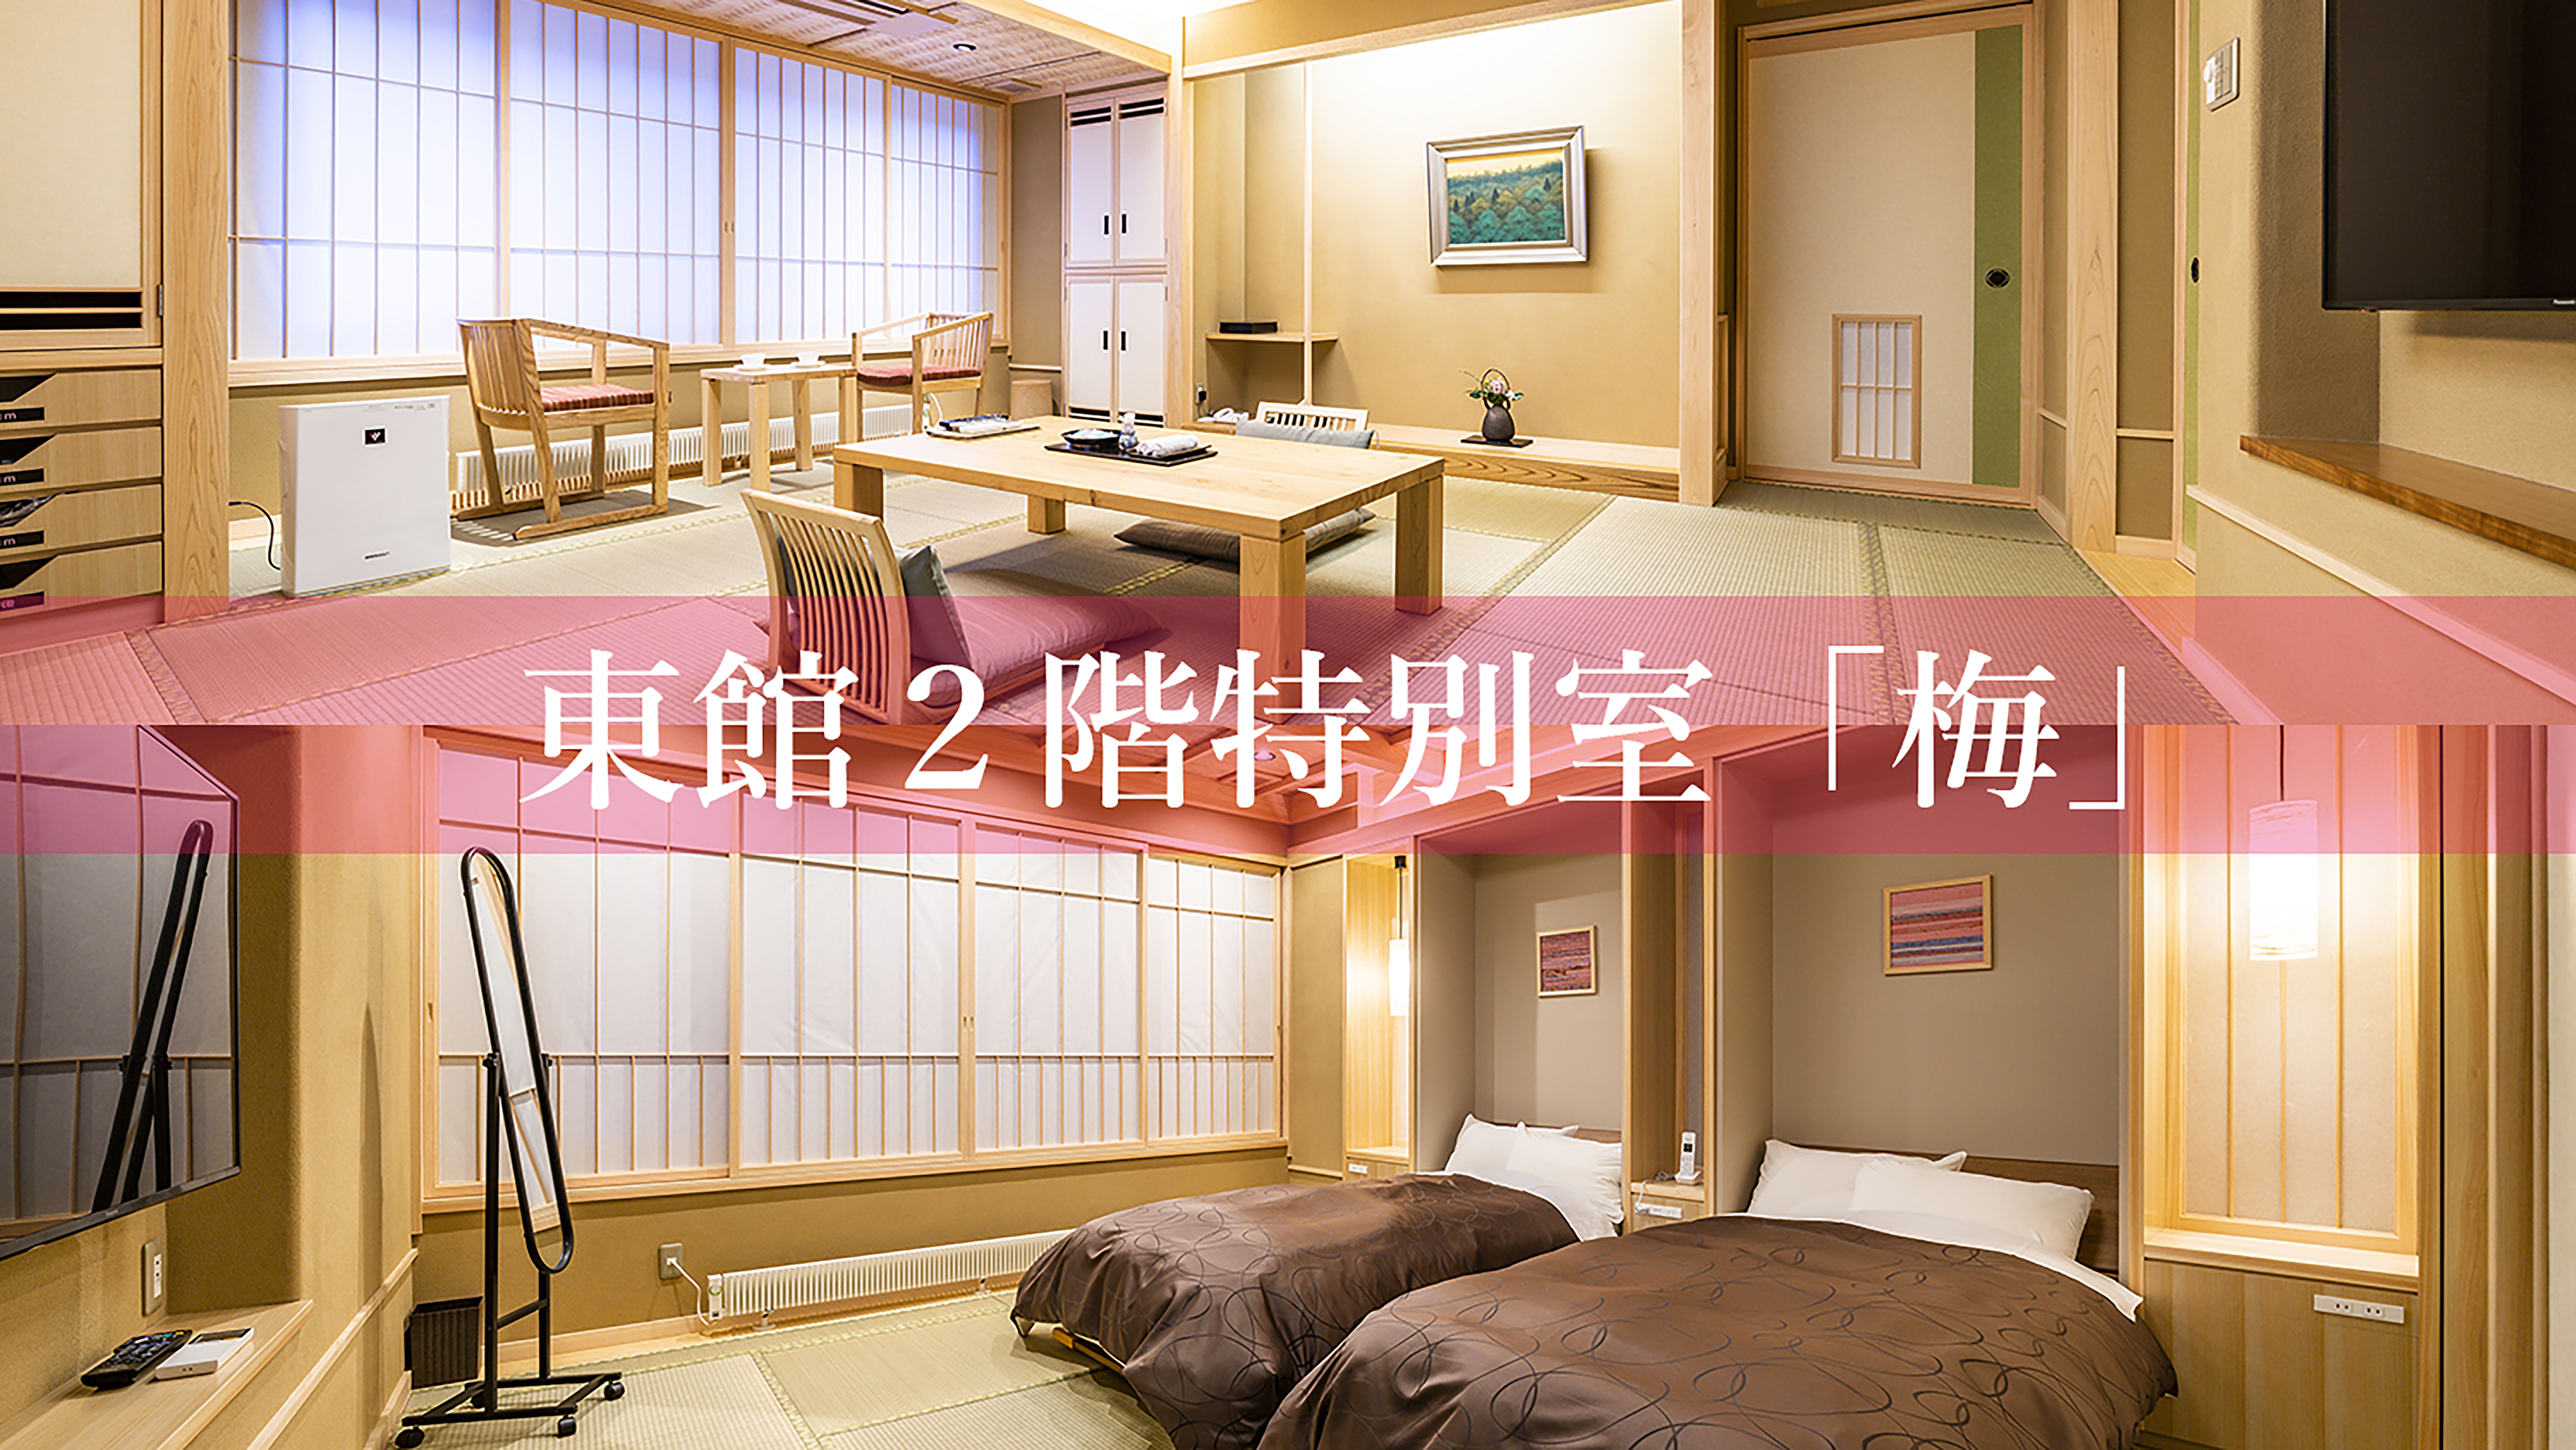 Special Japanese and Western room "Ume" on the 2nd floor of the East Building